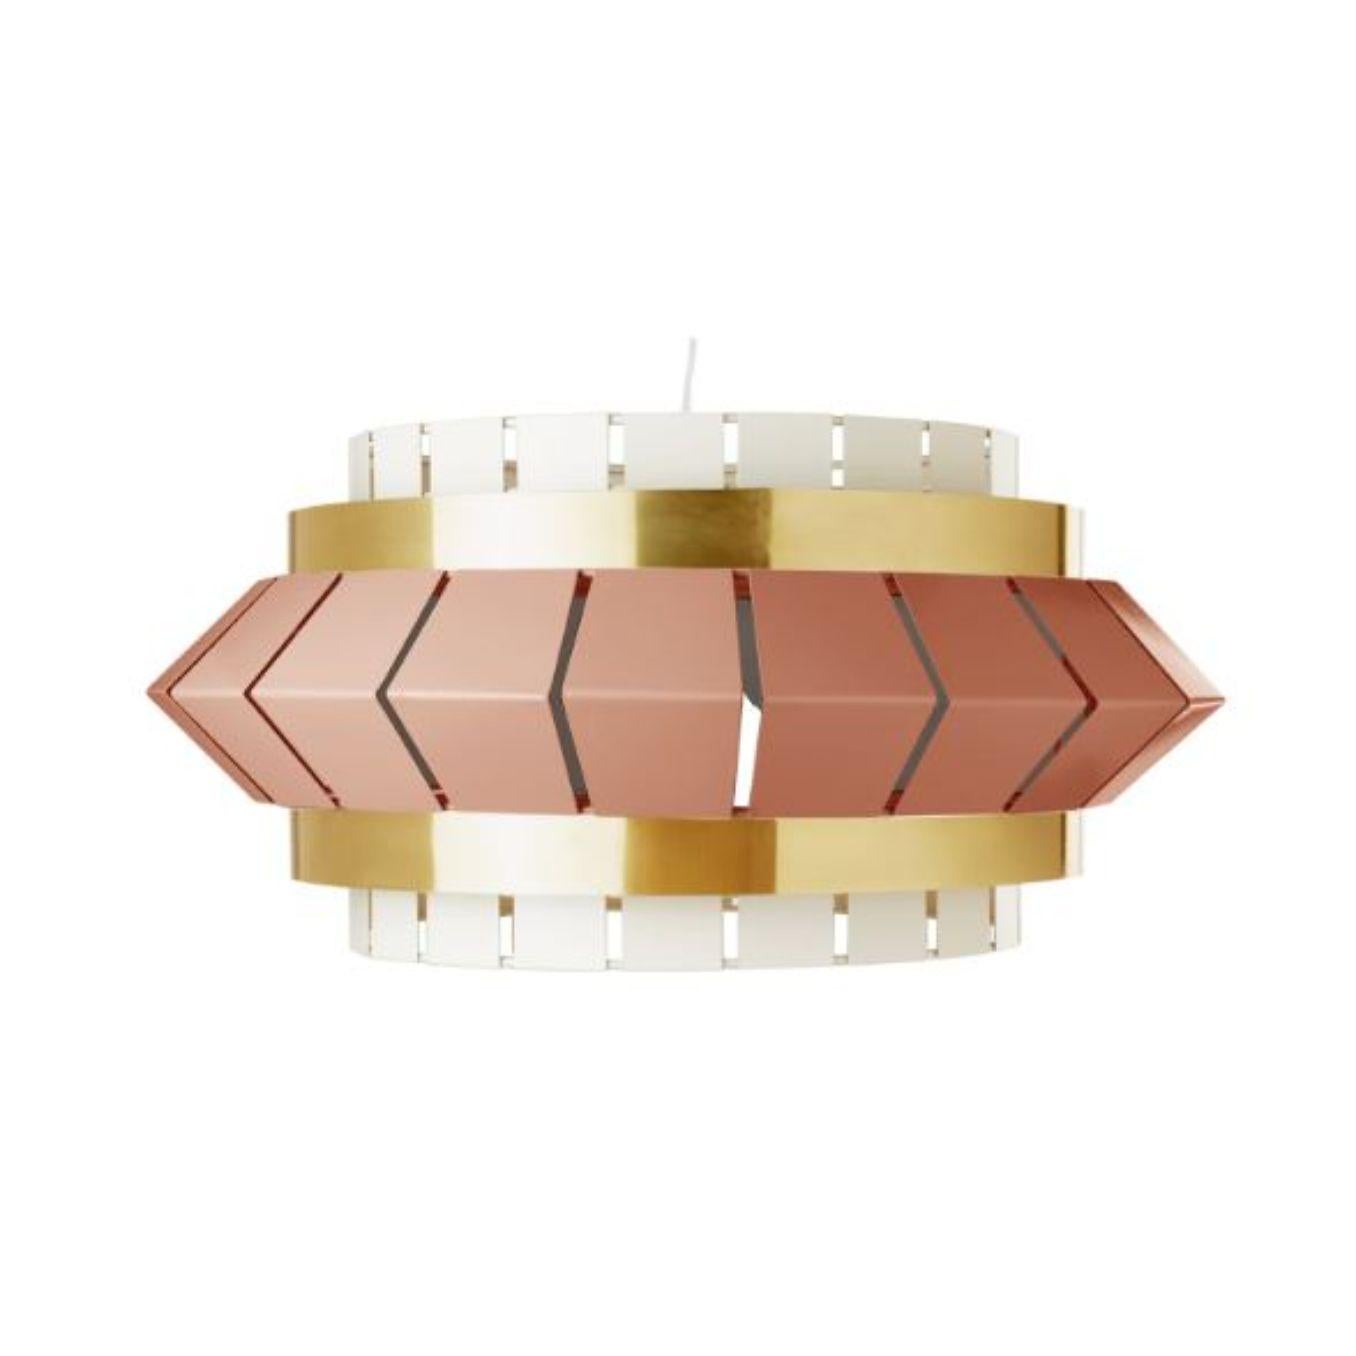 Ivory and Salmon comb I suspension lamp with brass ring by Dooq
Dimensions: W 75 x D 75 x H 35 cm
Materials: lacquered metal, polished brass.
Also available in different colors and materials.

Information:
230V/50Hz
E27/1x20W